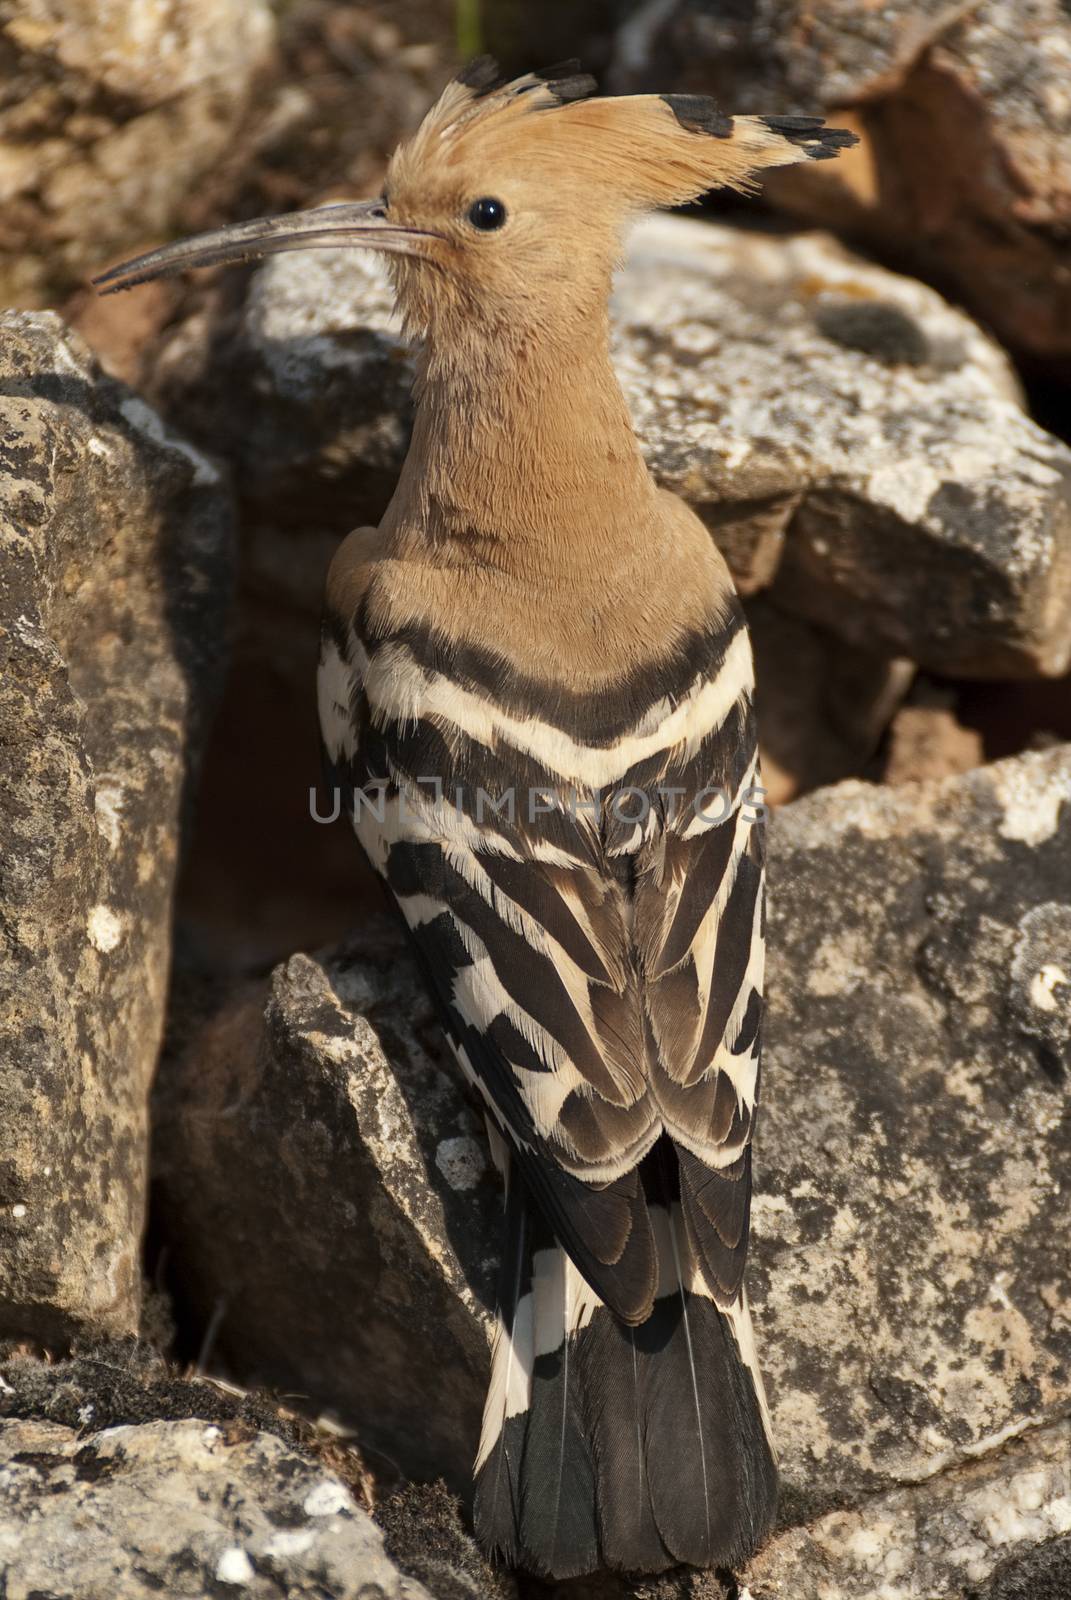 Eurasia Hoopoe or Common Hoopoe (Upupa epops), perched on the ro by jalonsohu@gmail.com